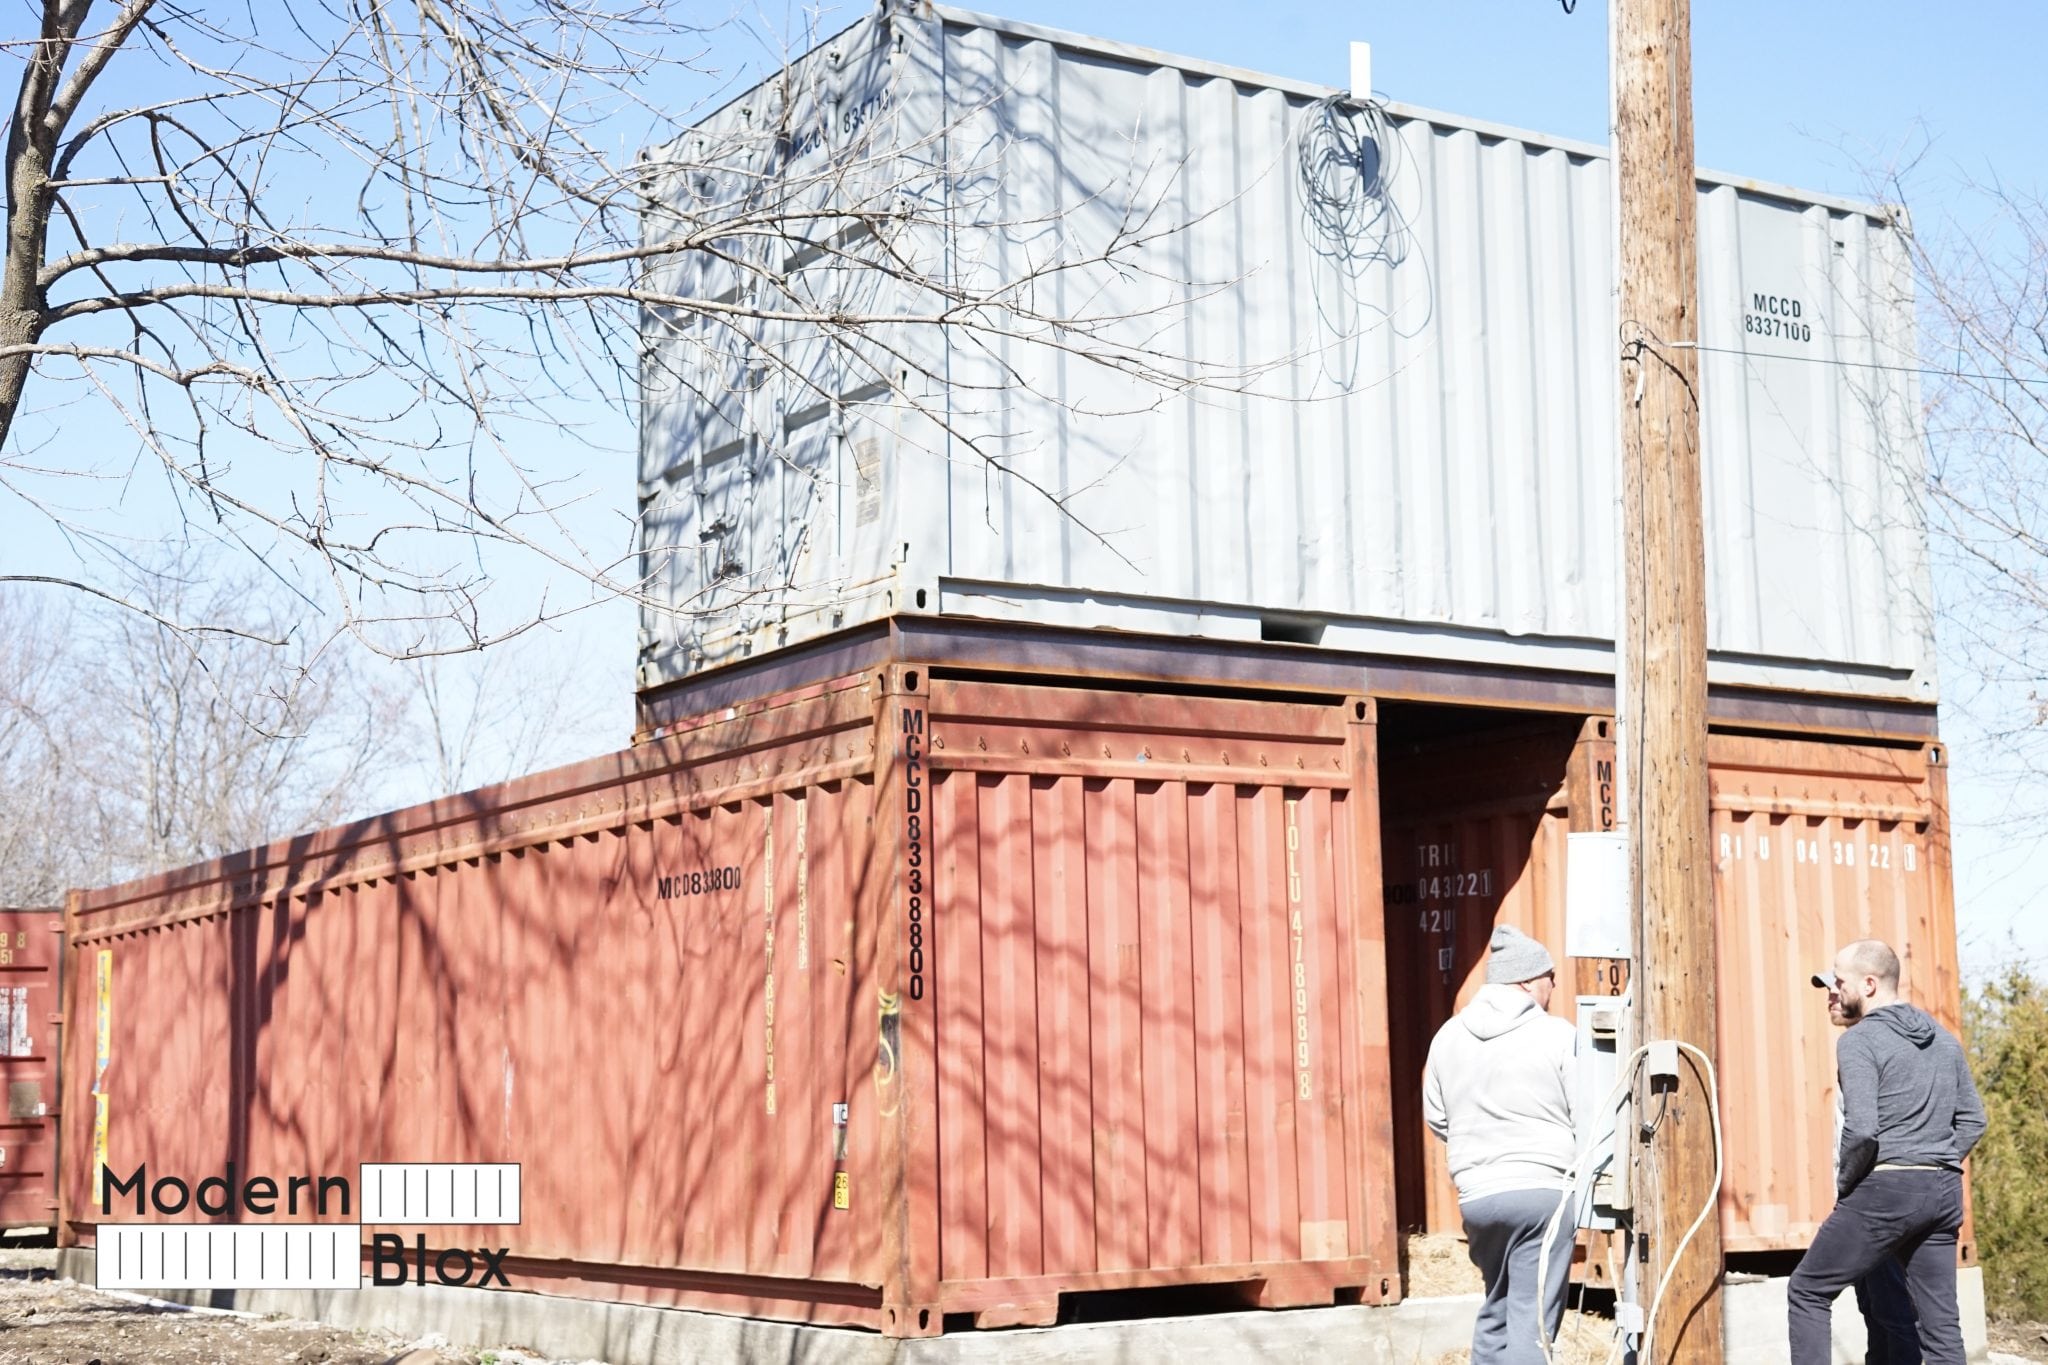 3BLOX CONTAINER HOME